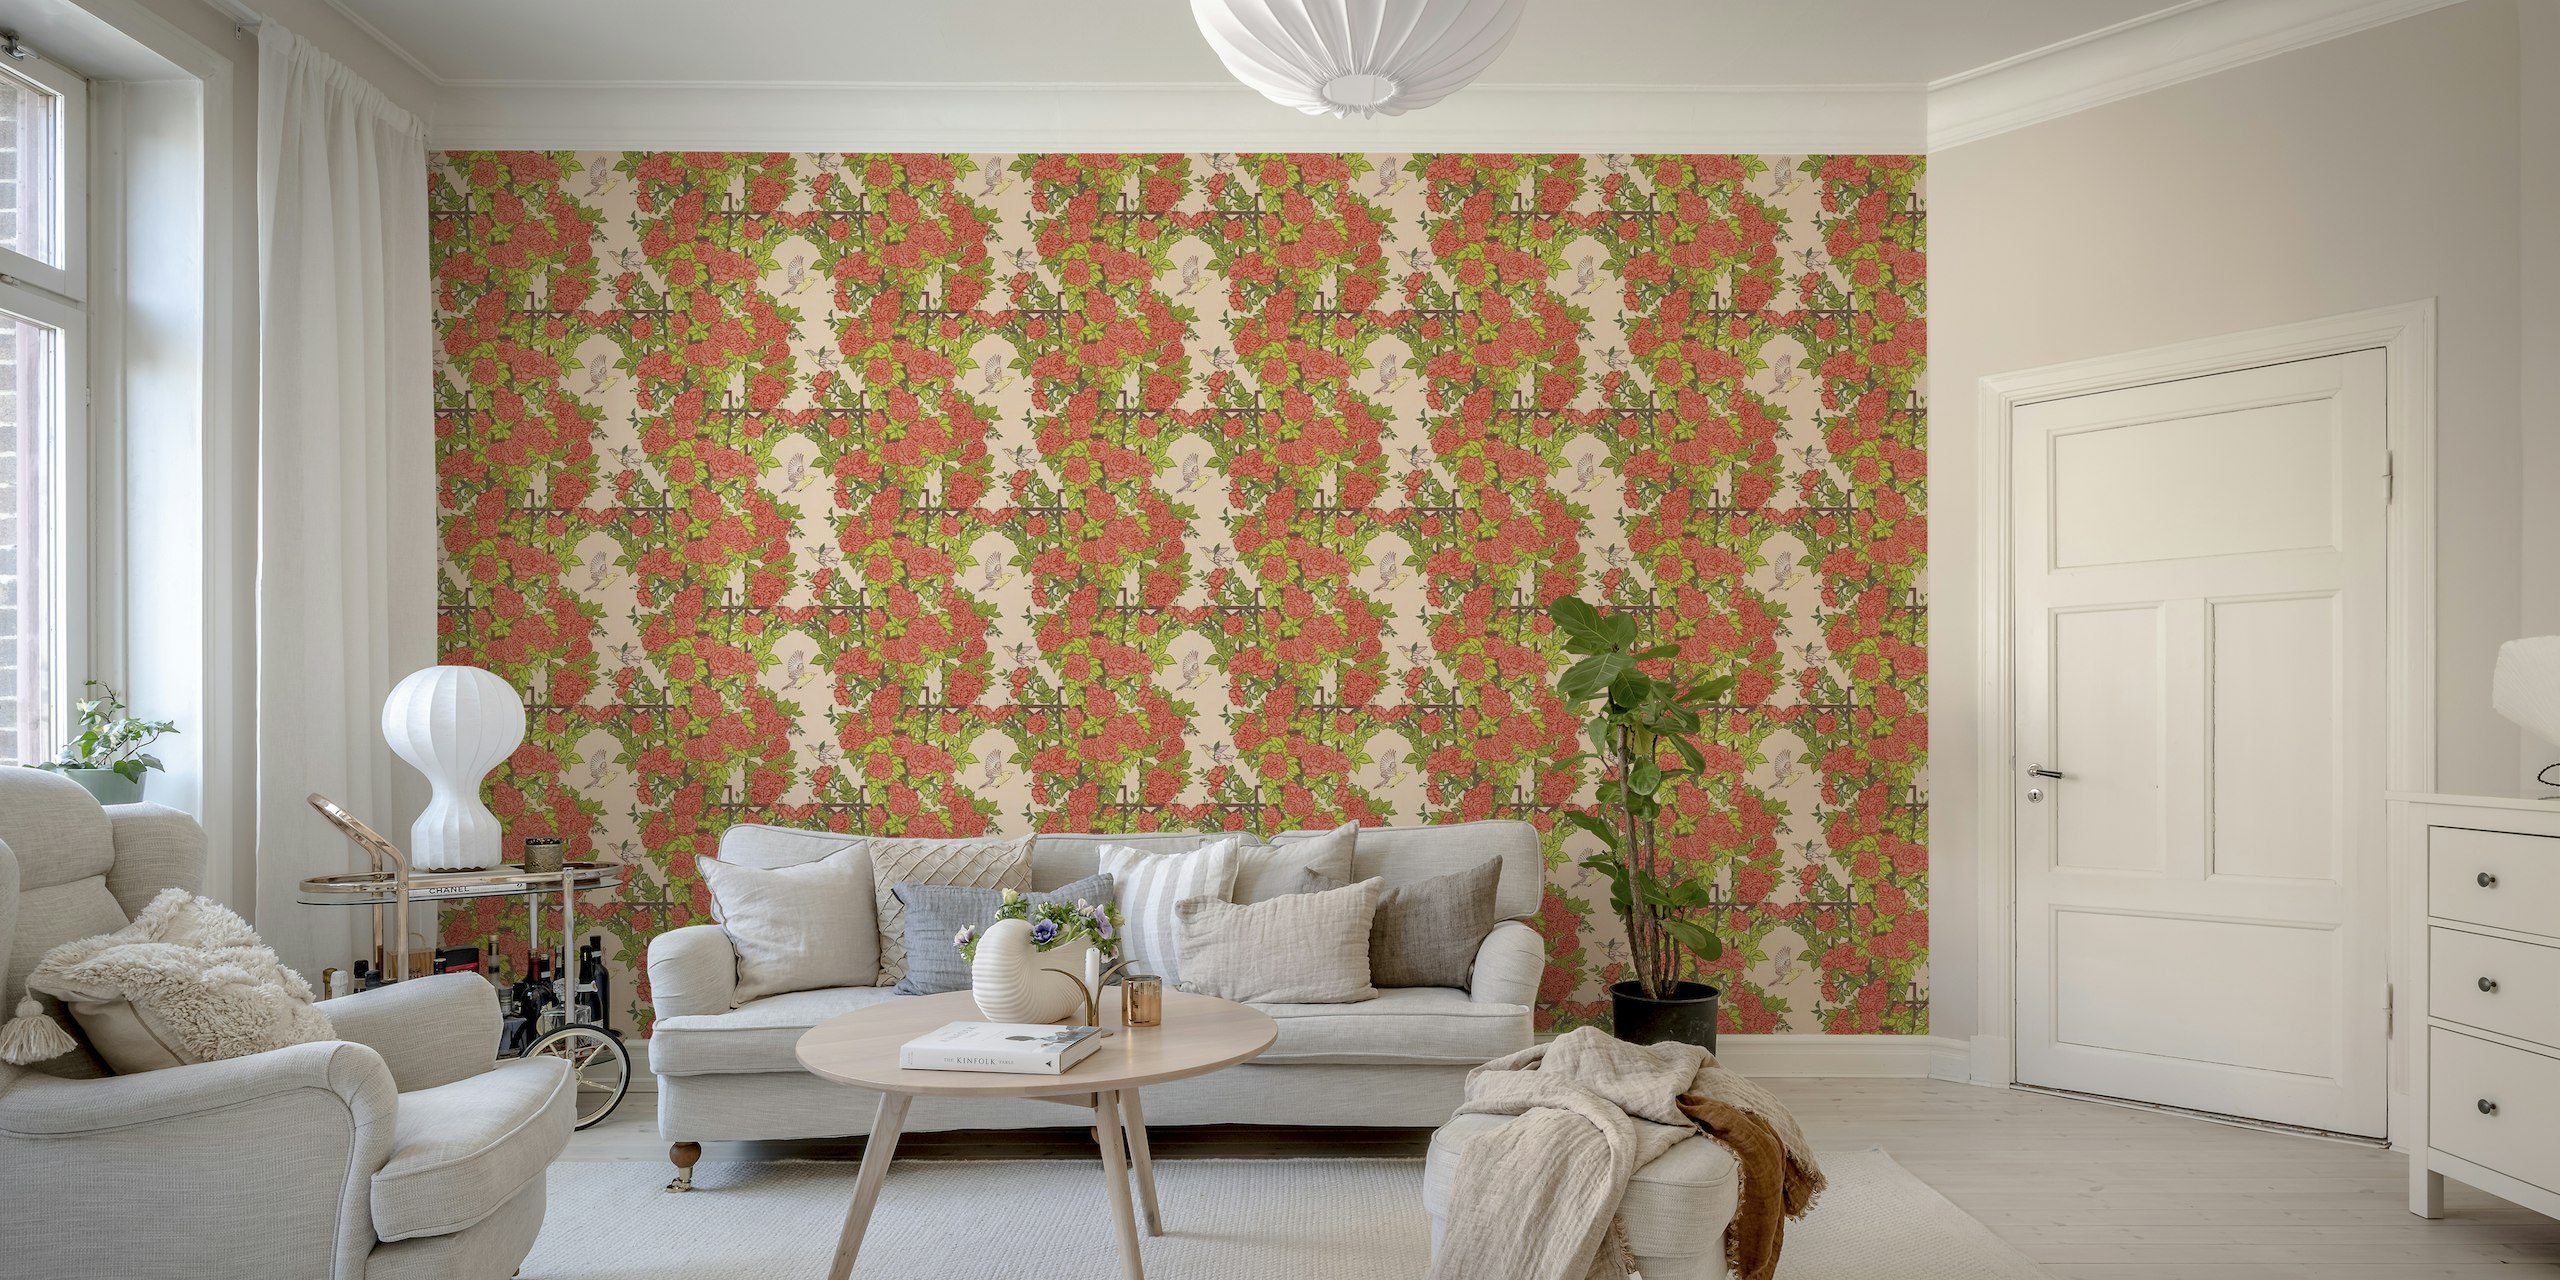 Wall mural with green vines, pink roses, and birds on a peach background